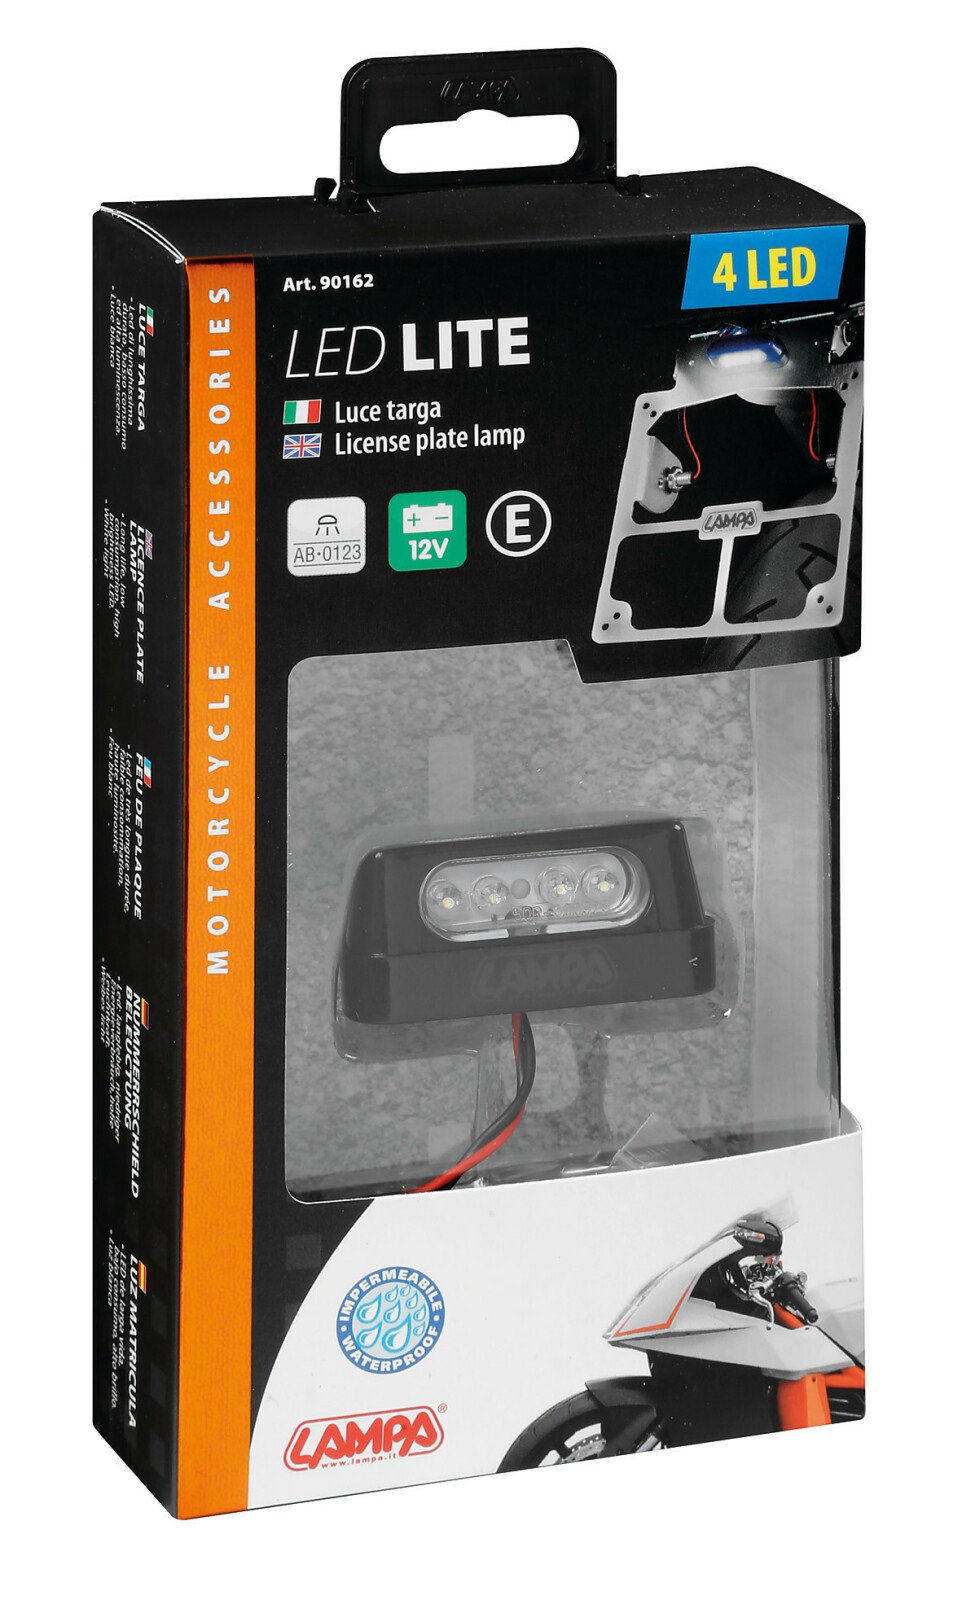 4 Led licence plate lamp - White - Approved thumb